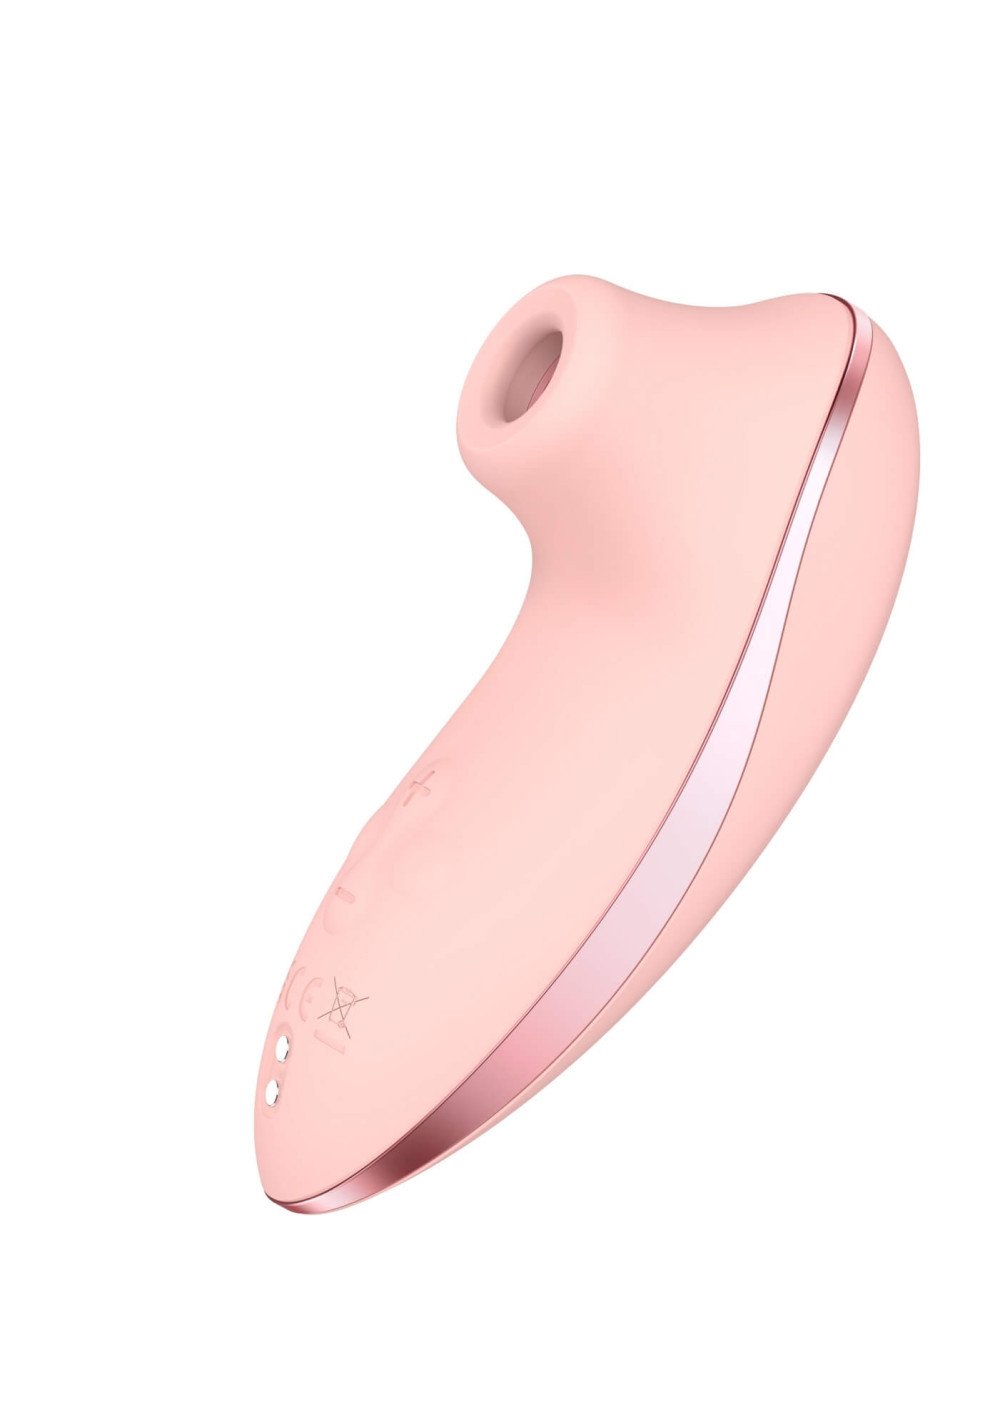 Vibeconnect - Rechargeable Airwave Clitoral Stimulator (Beige)